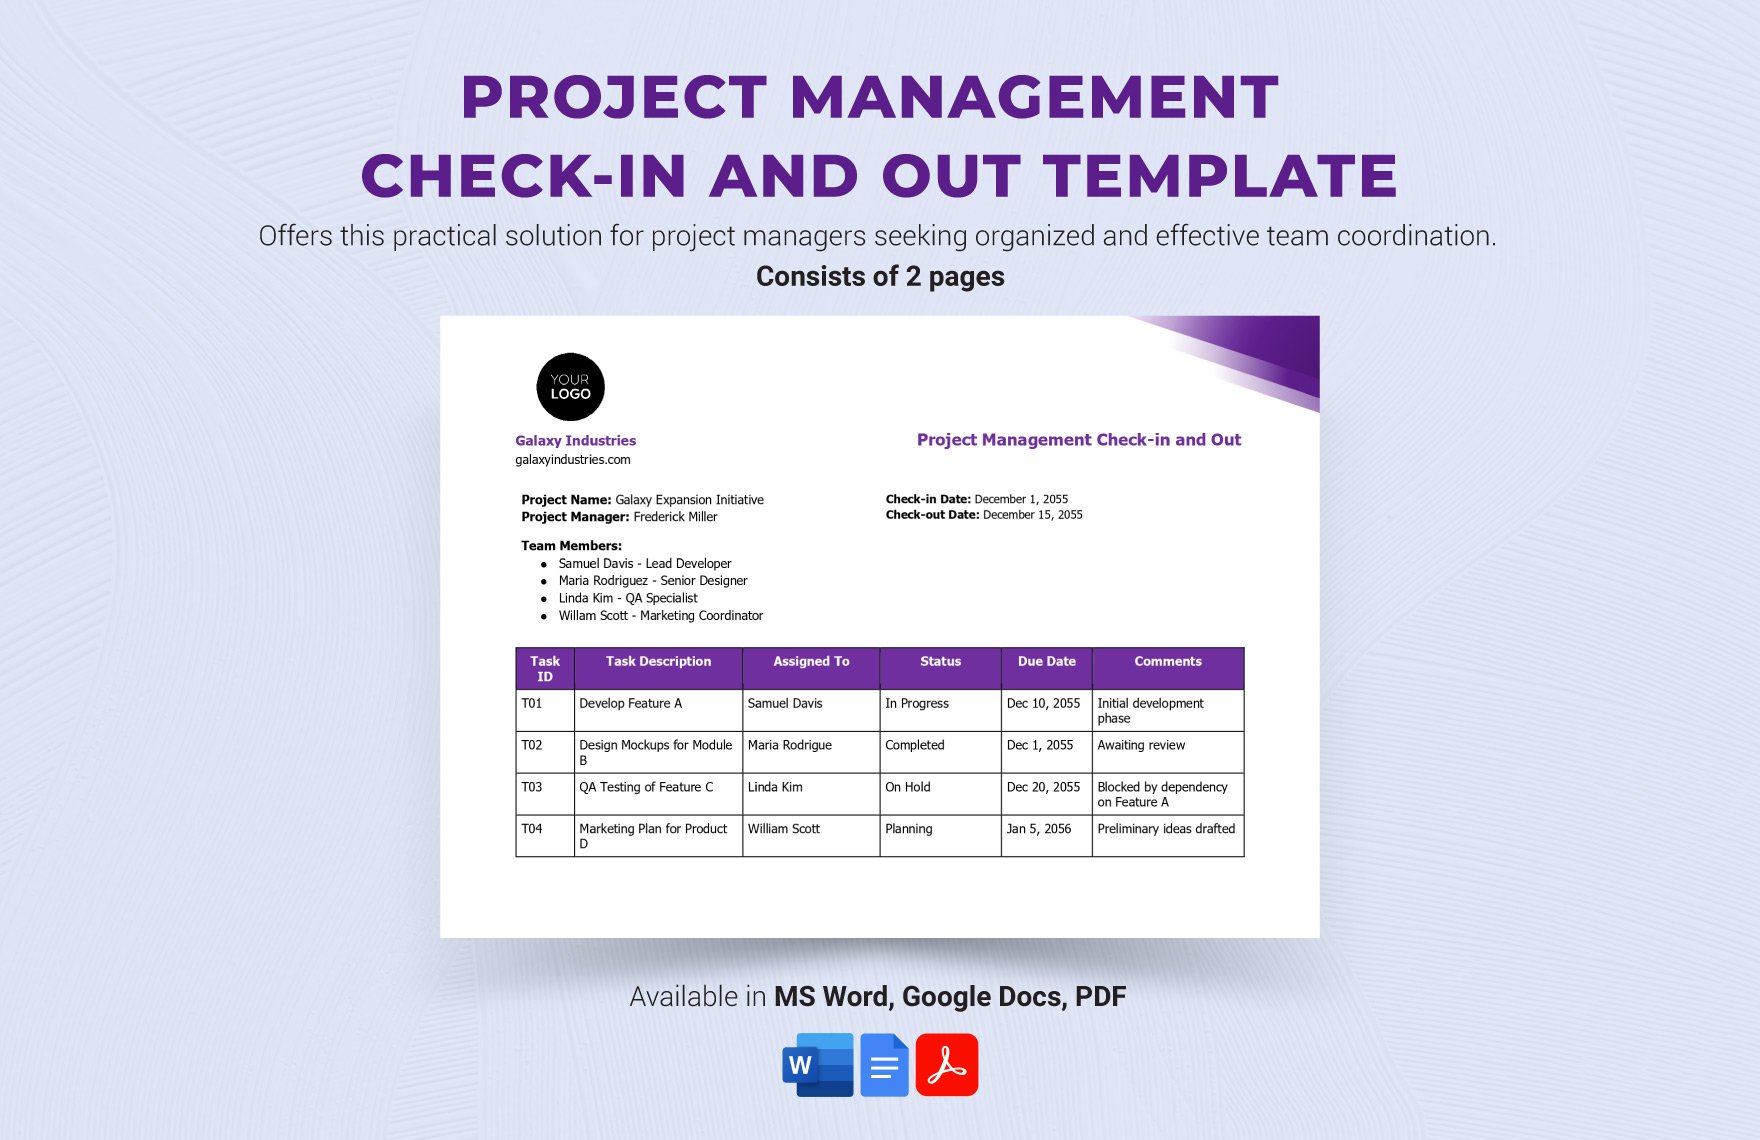 Project Management Check-in and Out Template